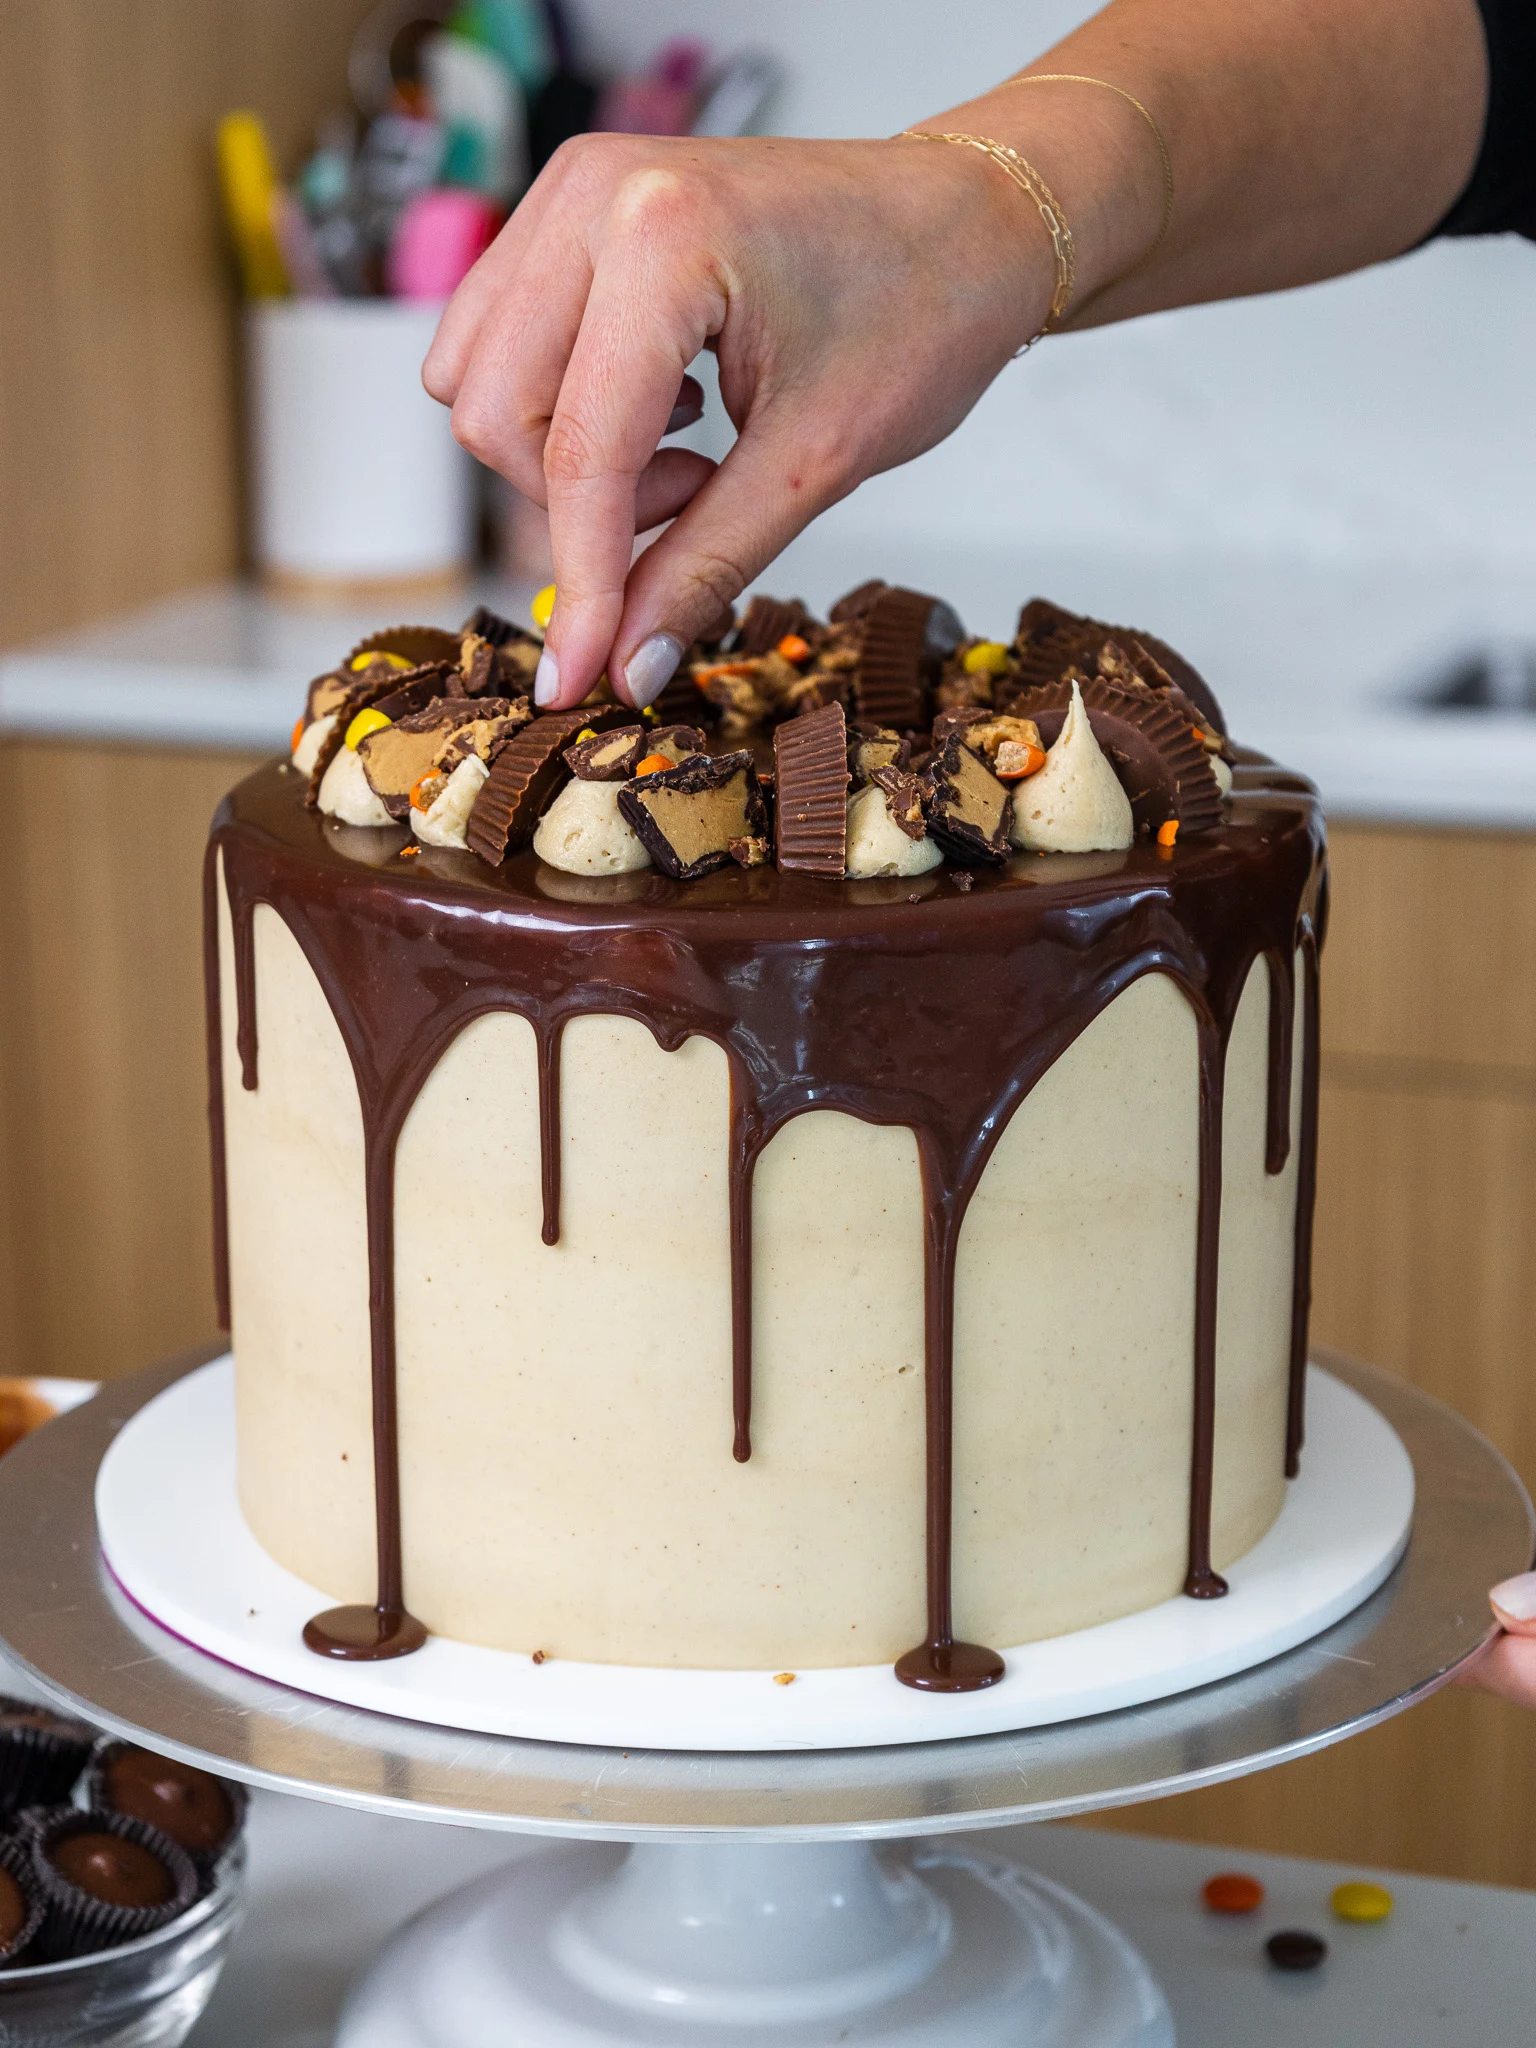 image of a reese's chocolate peanut butter cake that's been decorated with a chocolate drip and reese's candies